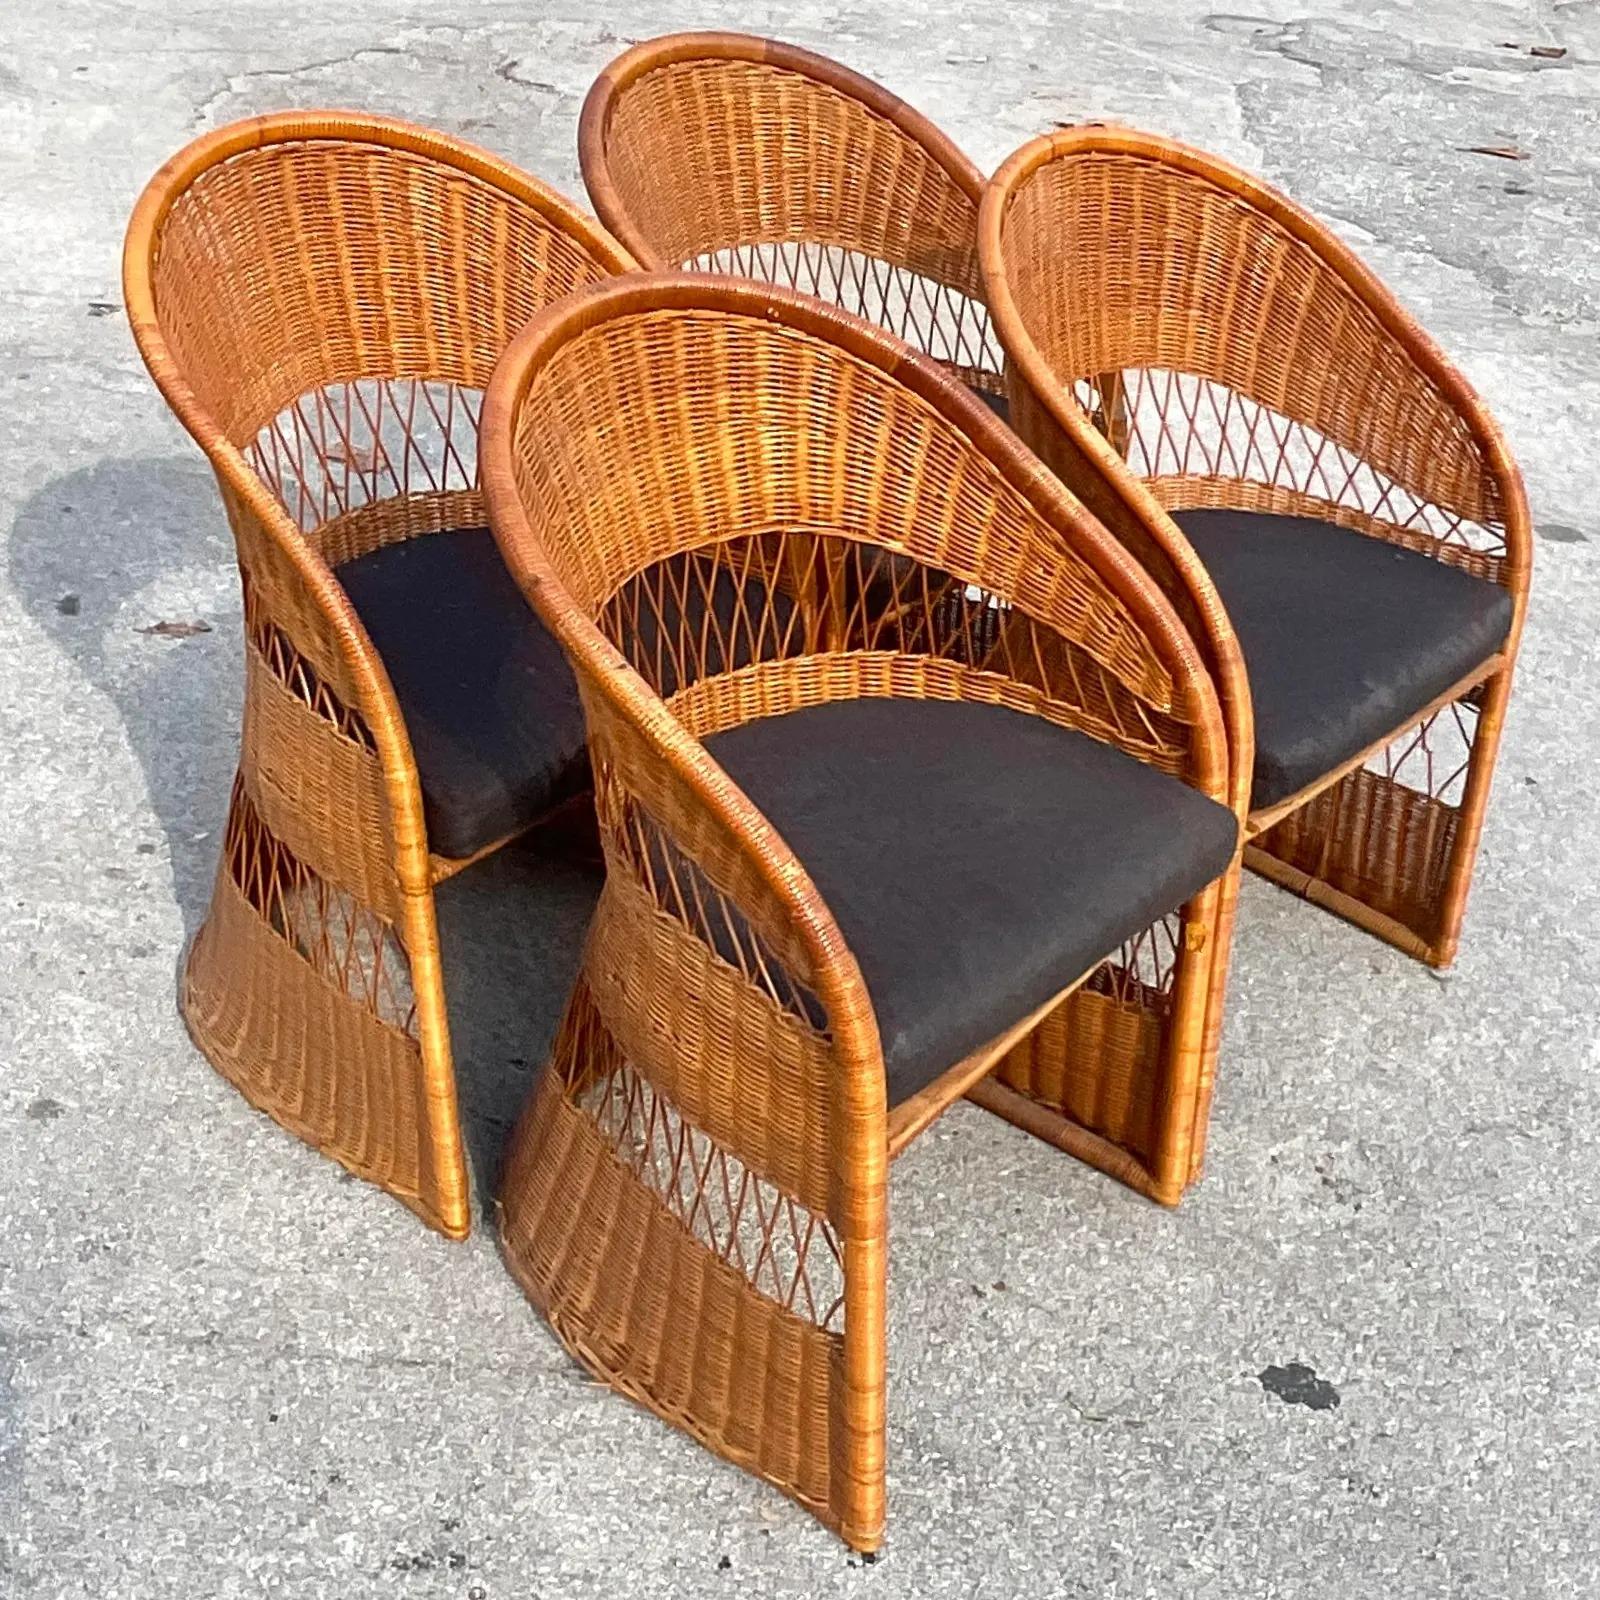 Philippine Vintage Coastal Woven Rattan Dining Chairs, Set of Four